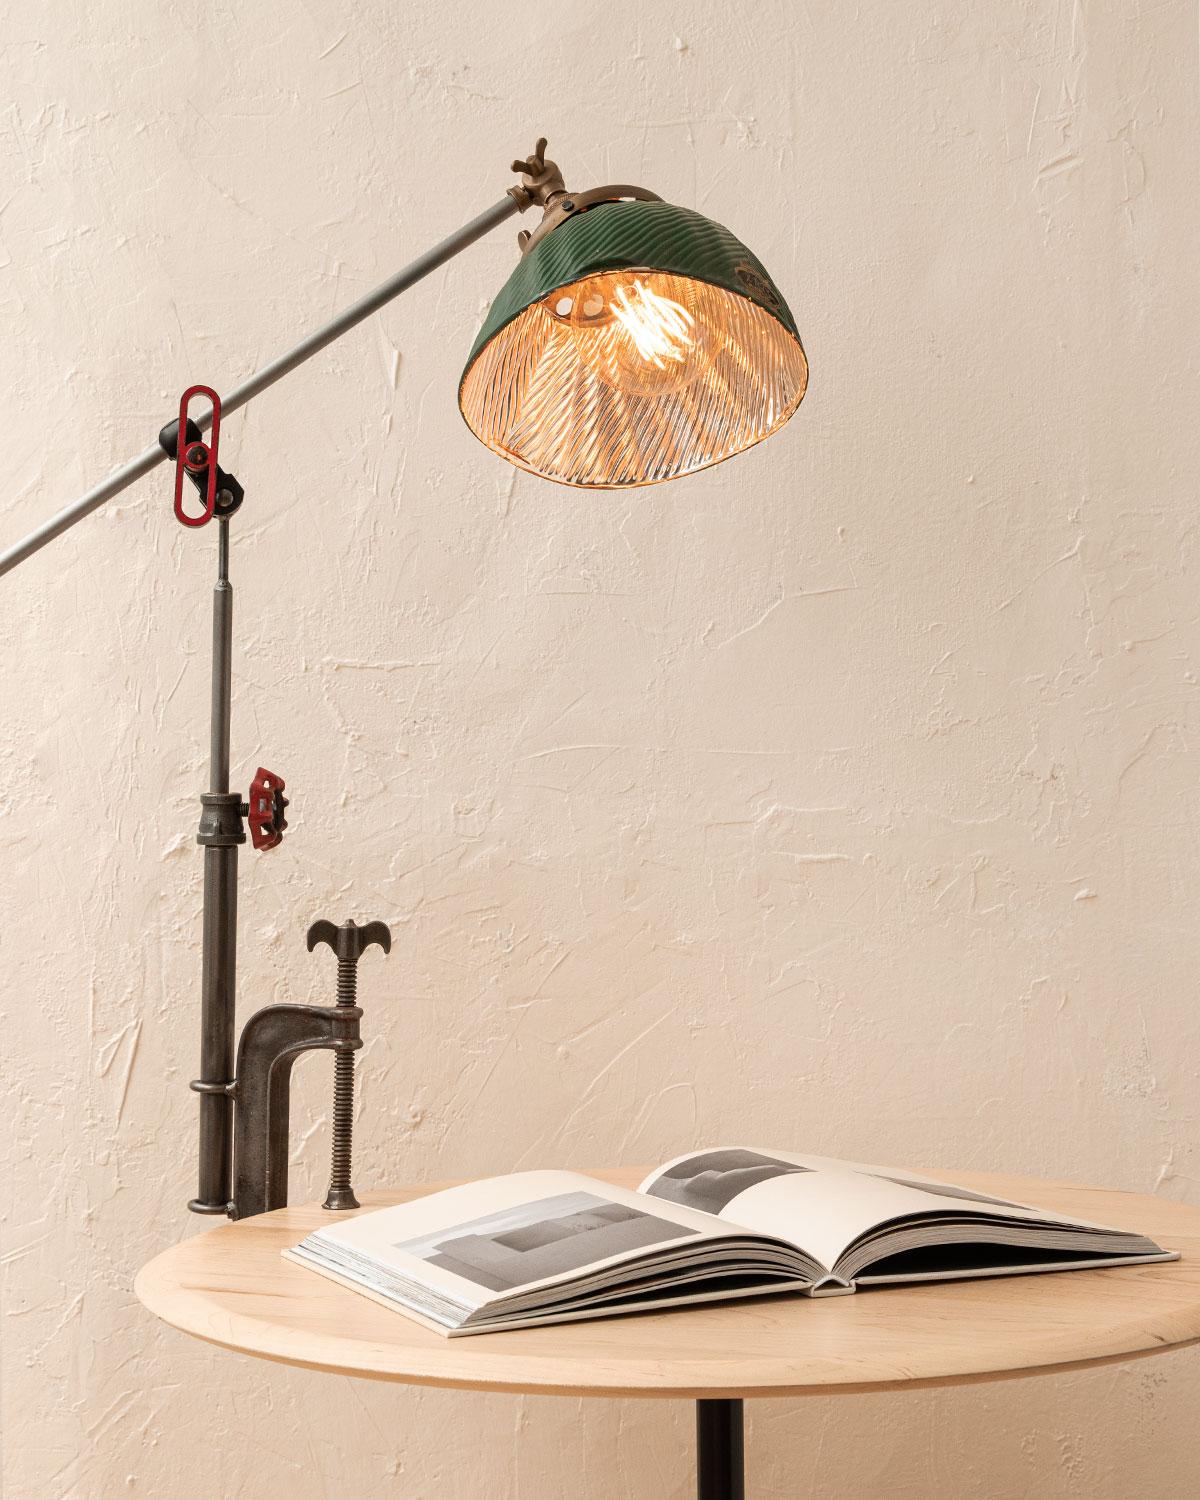 Robert True Ogden's one-of-a-like Found Object Lamps are made by hand in Philadelphia. Crafted from pieces and parts sourced locally and abroad, no two lamps are alike. 

This clamp lamp has a vintage asymmetrical green-painted glass shade with a